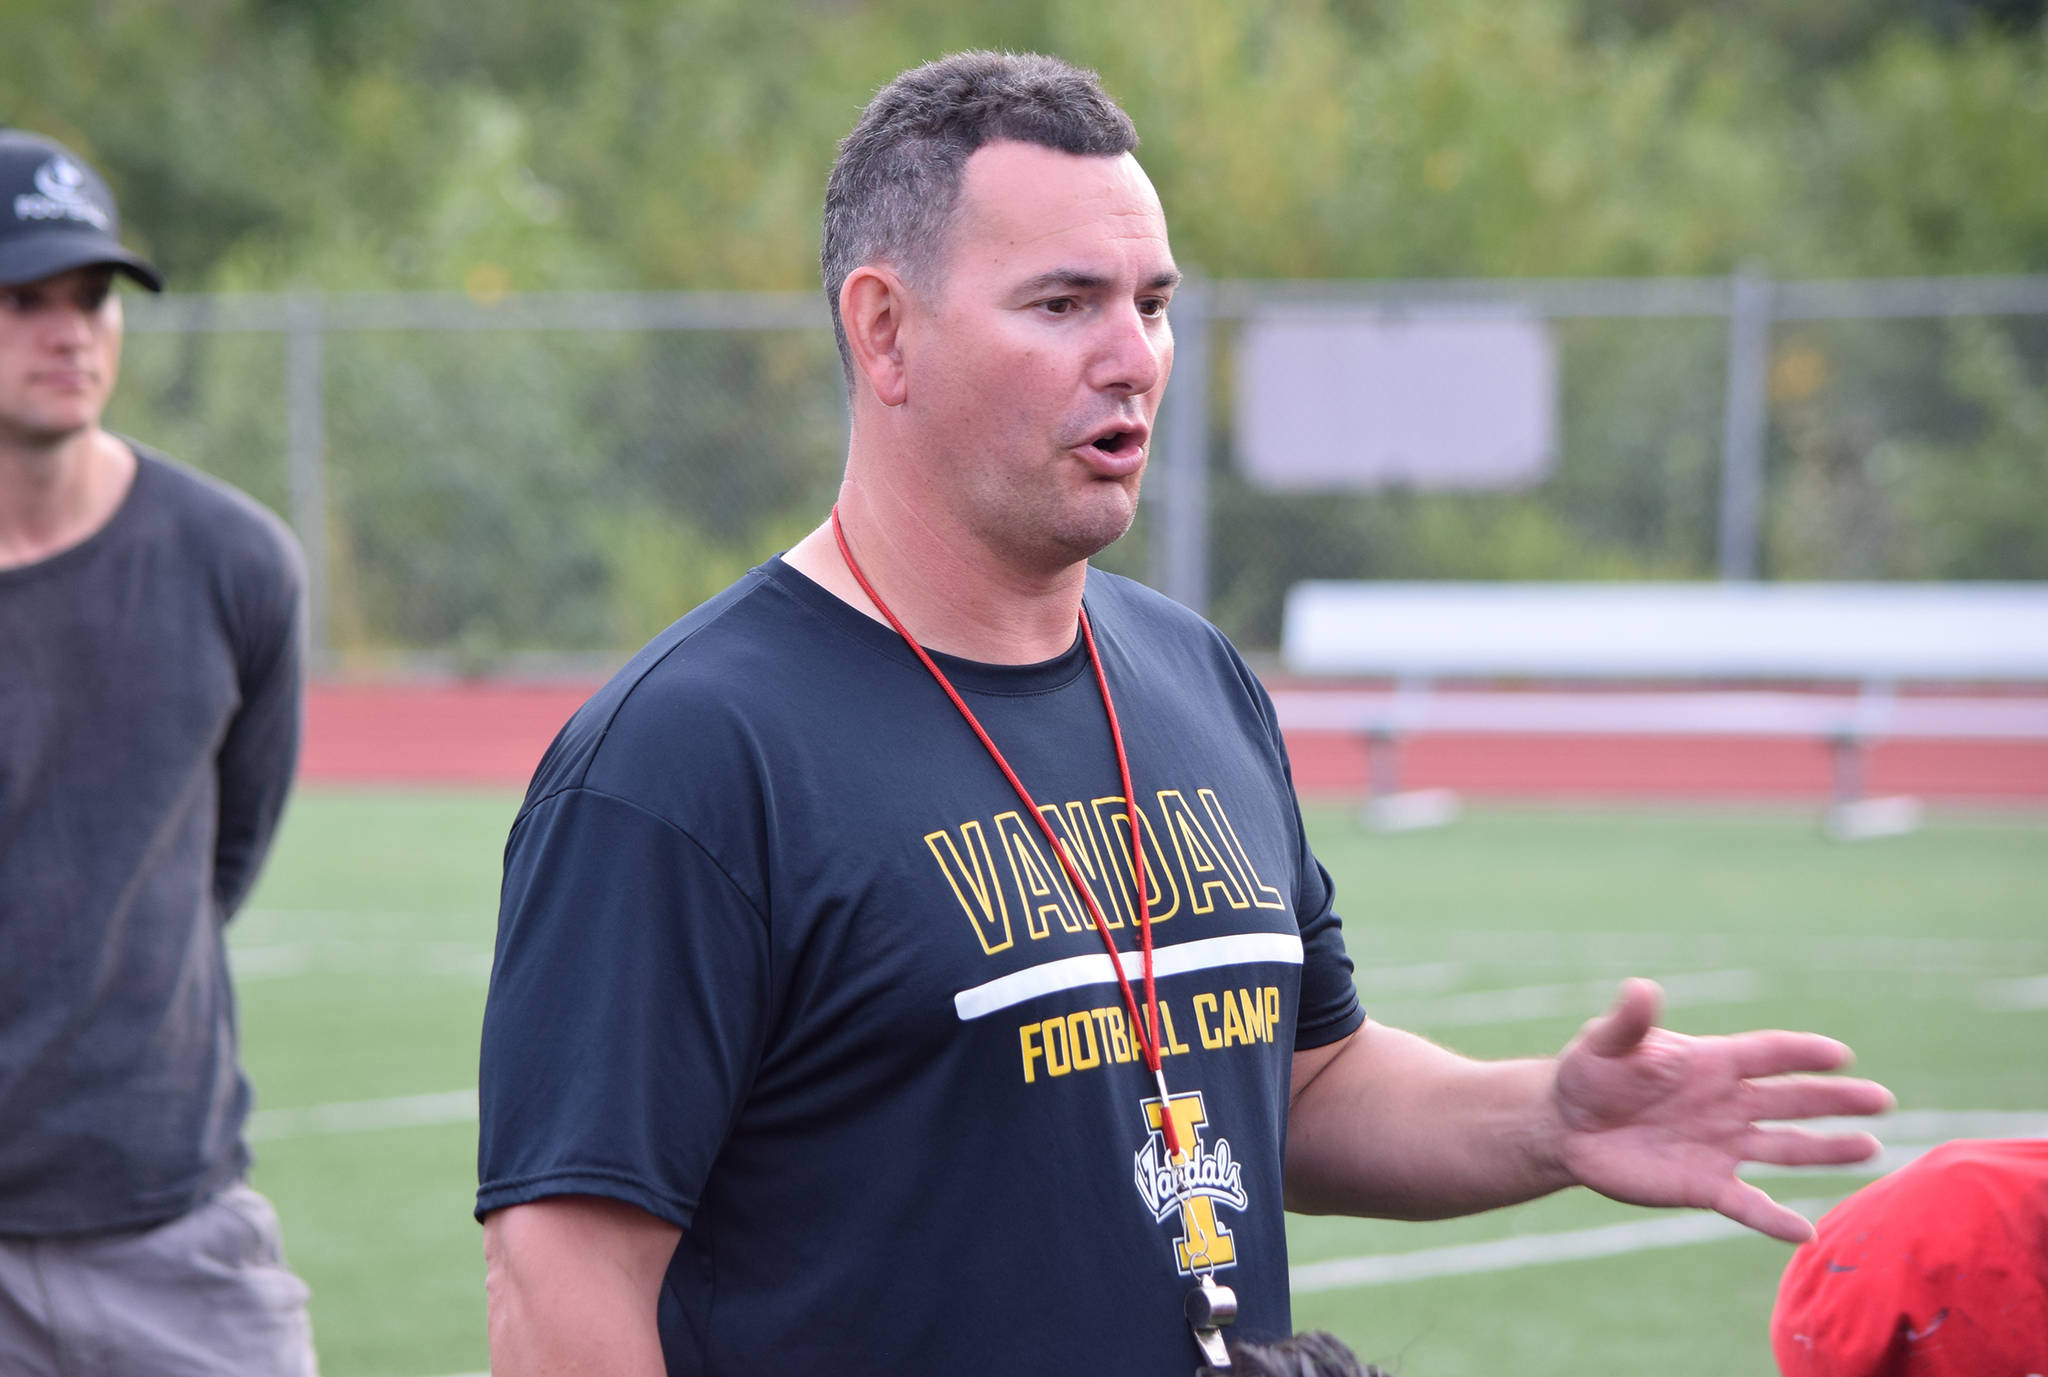 Juneau Huskies football coach Rich Sjoroos speaks to his team after practice at Thunder Mountain High School on Wednesday, Aug. 14, 2019. (Nolin Ainsworth | Juneau Empire)